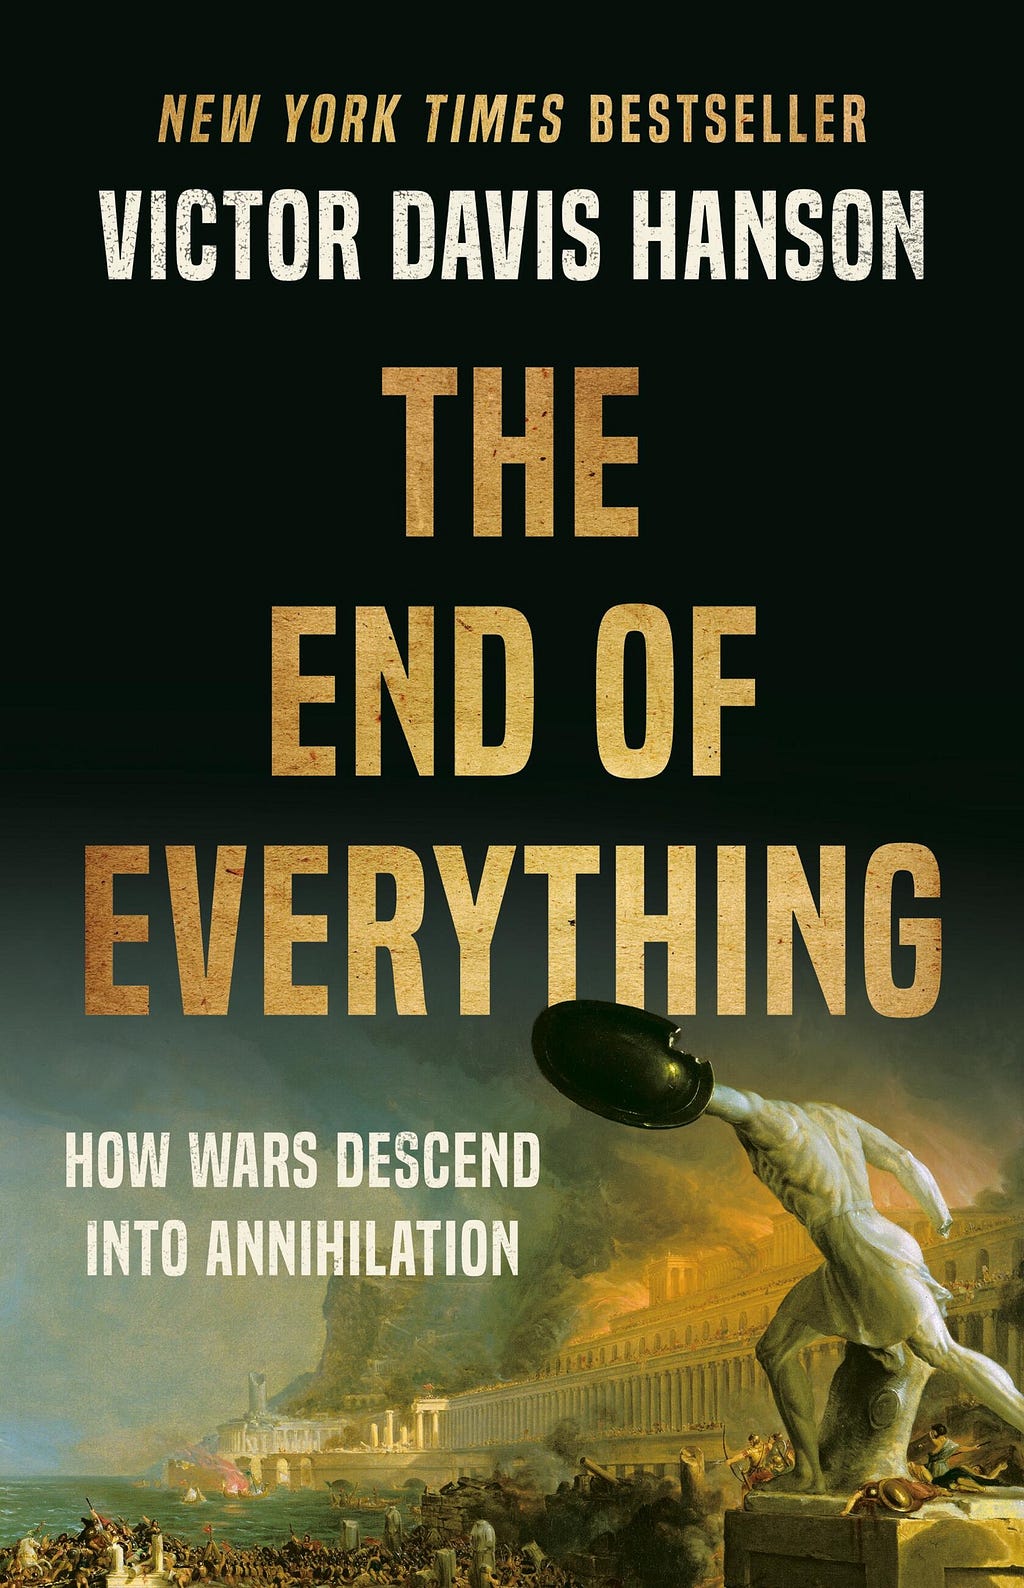 [Audiobooks] DOWNLOAD -The End of Everything by Victor Davis Hanson